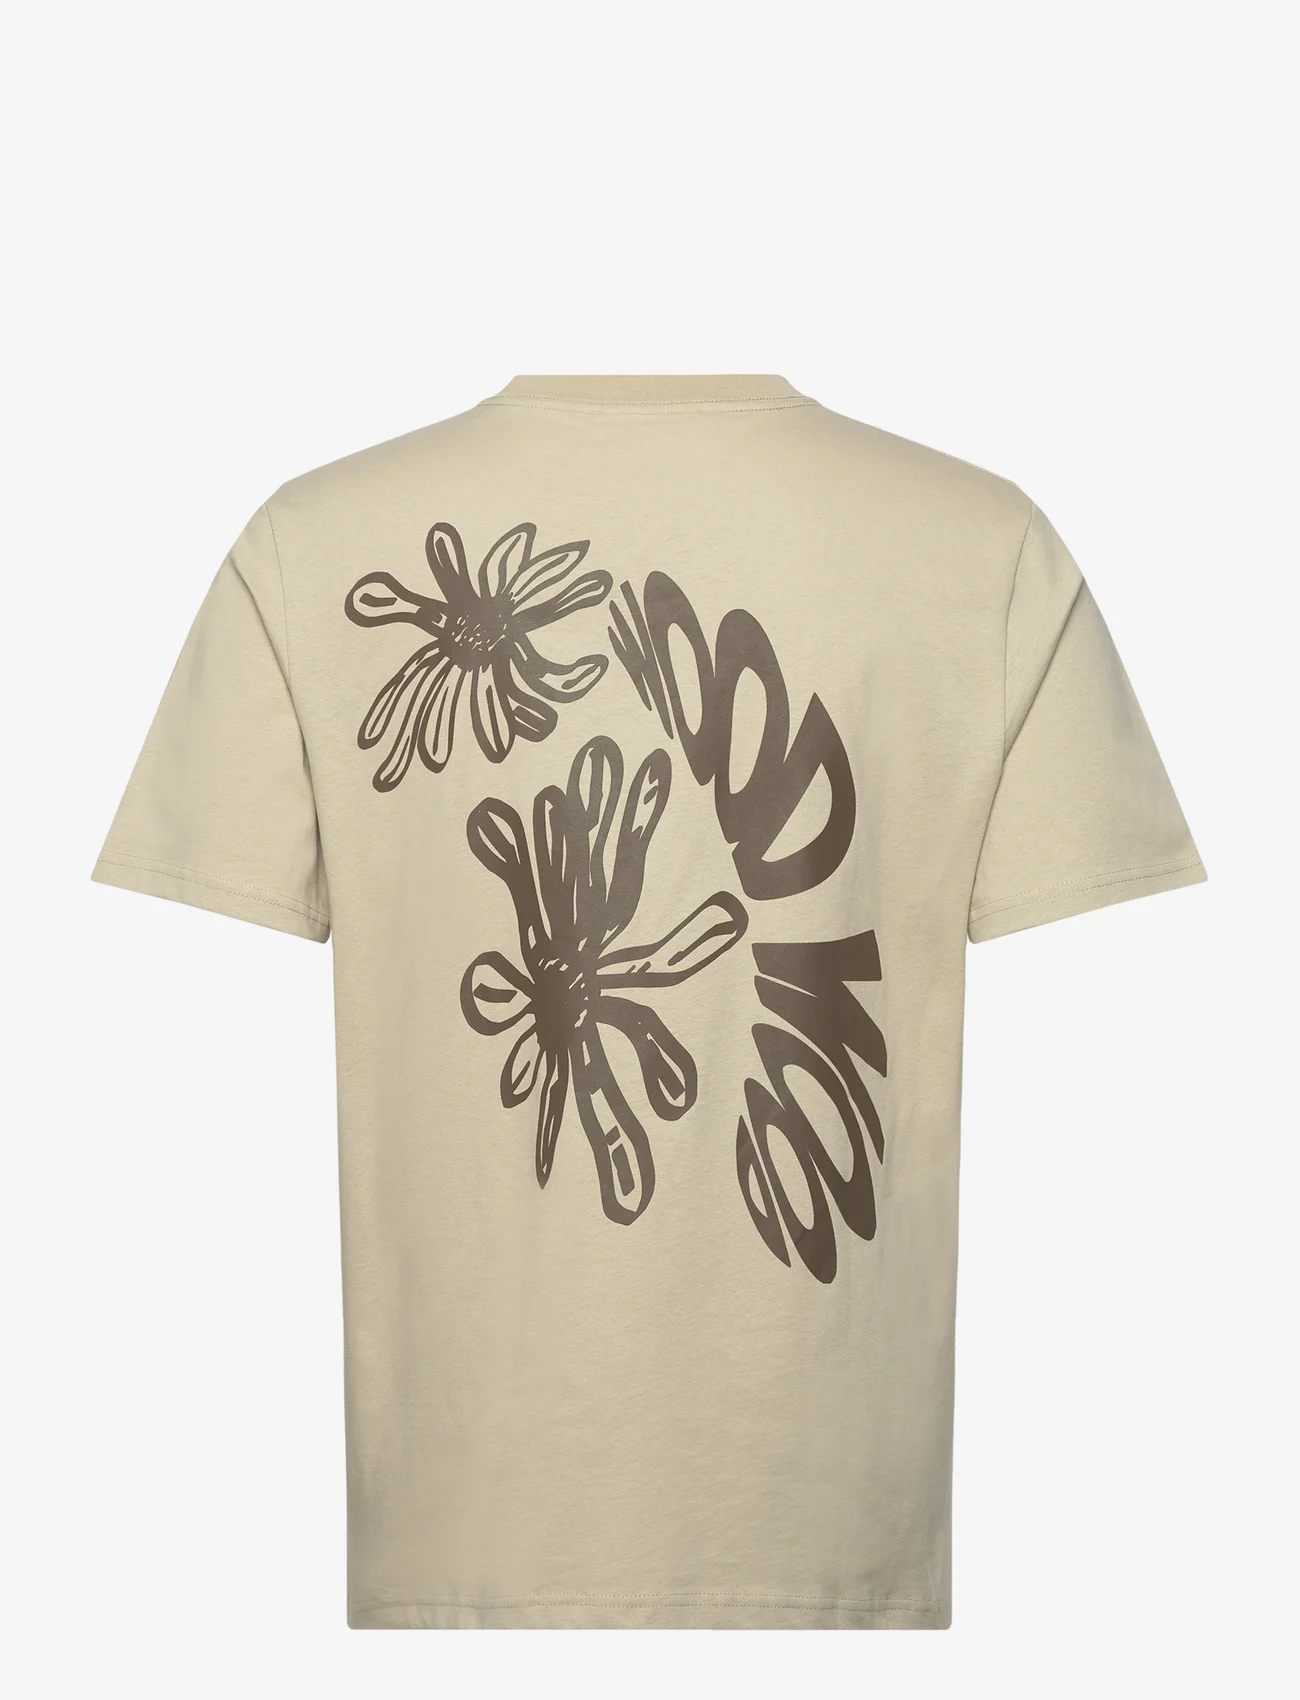 Wood Wood - Bobby Flowers T-shirt GOTS - t-shirts - taupe beige - 1